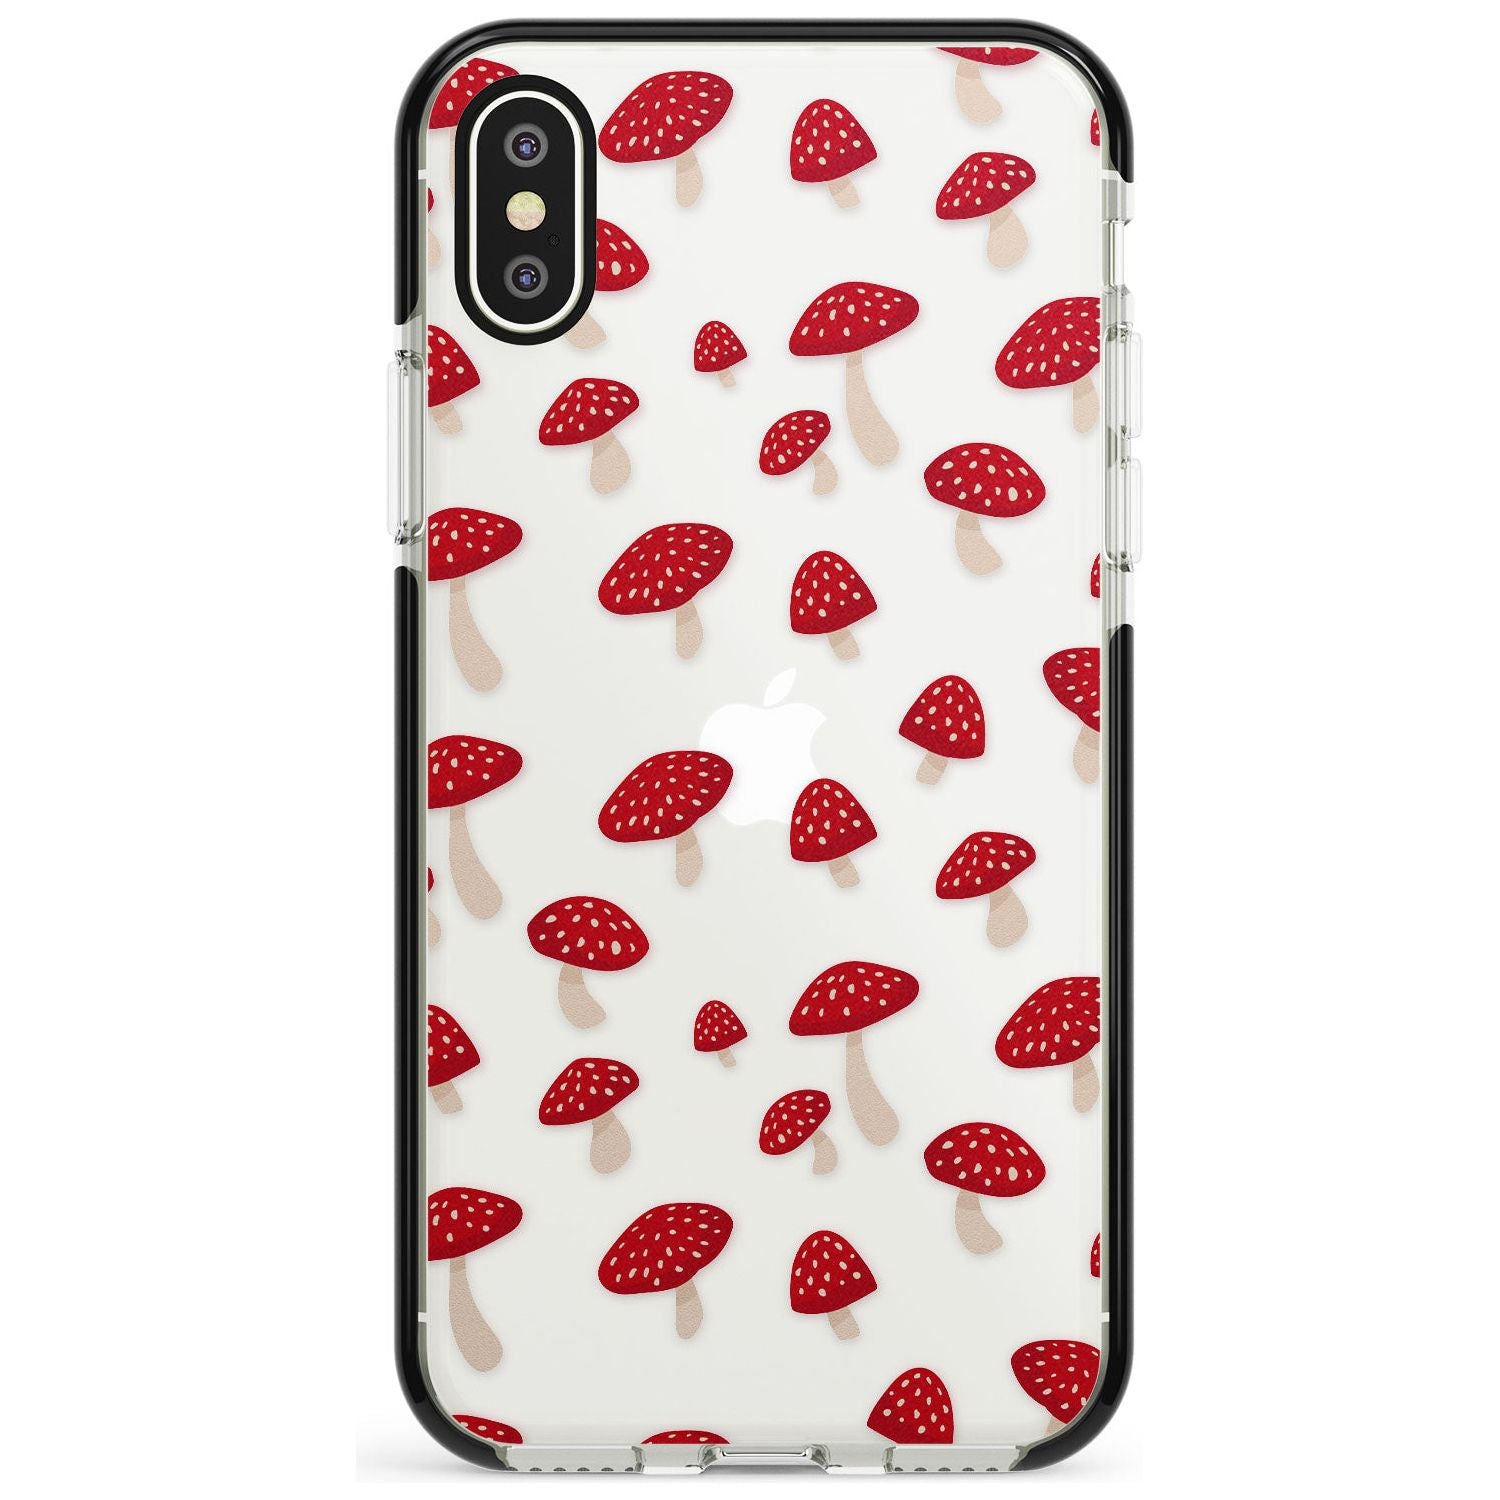 Magical Mushrooms Pattern Black Impact Phone Case for iPhone X XS Max XR